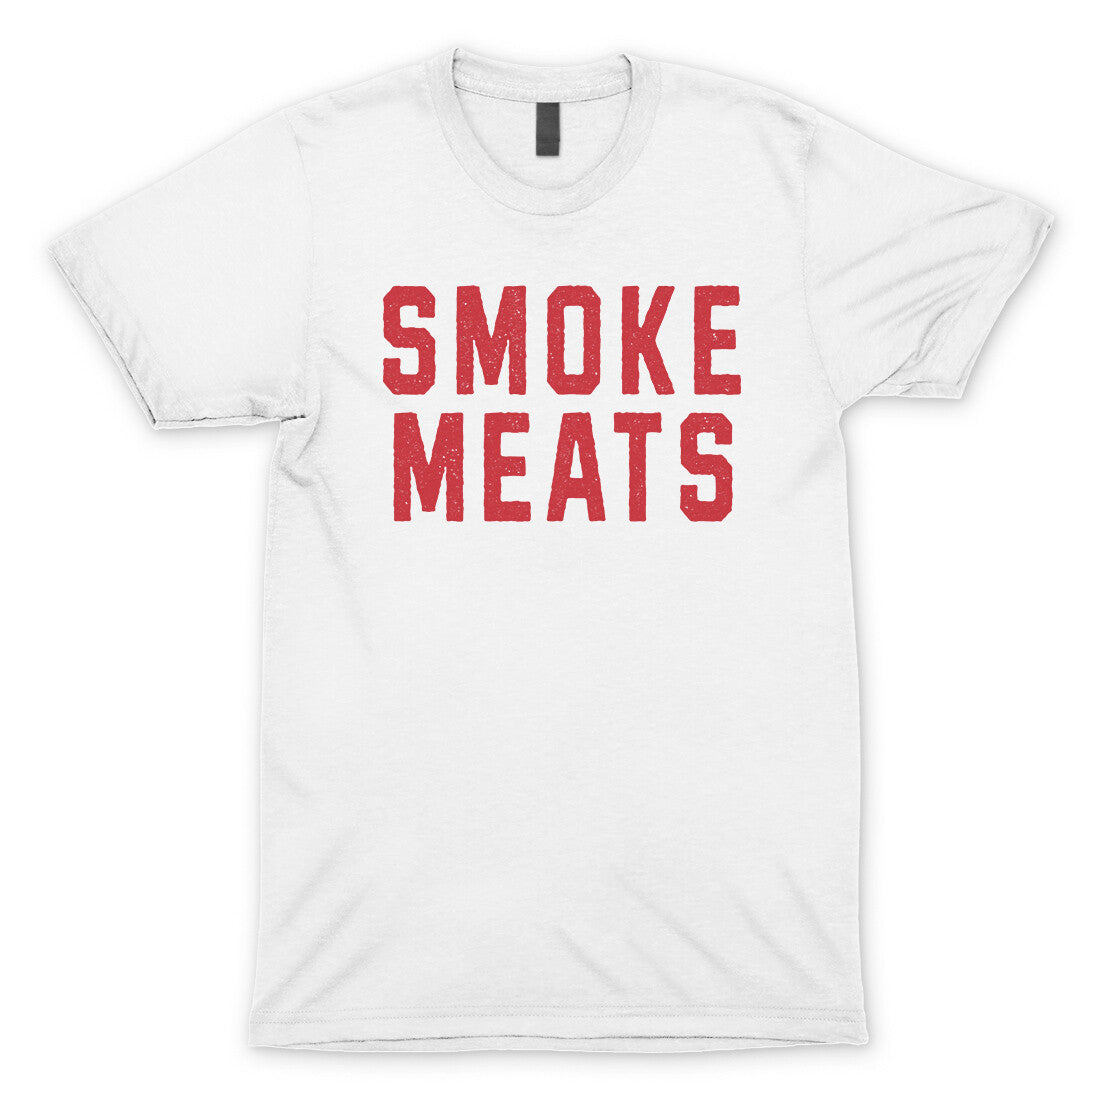 Smoke Meats in White Color